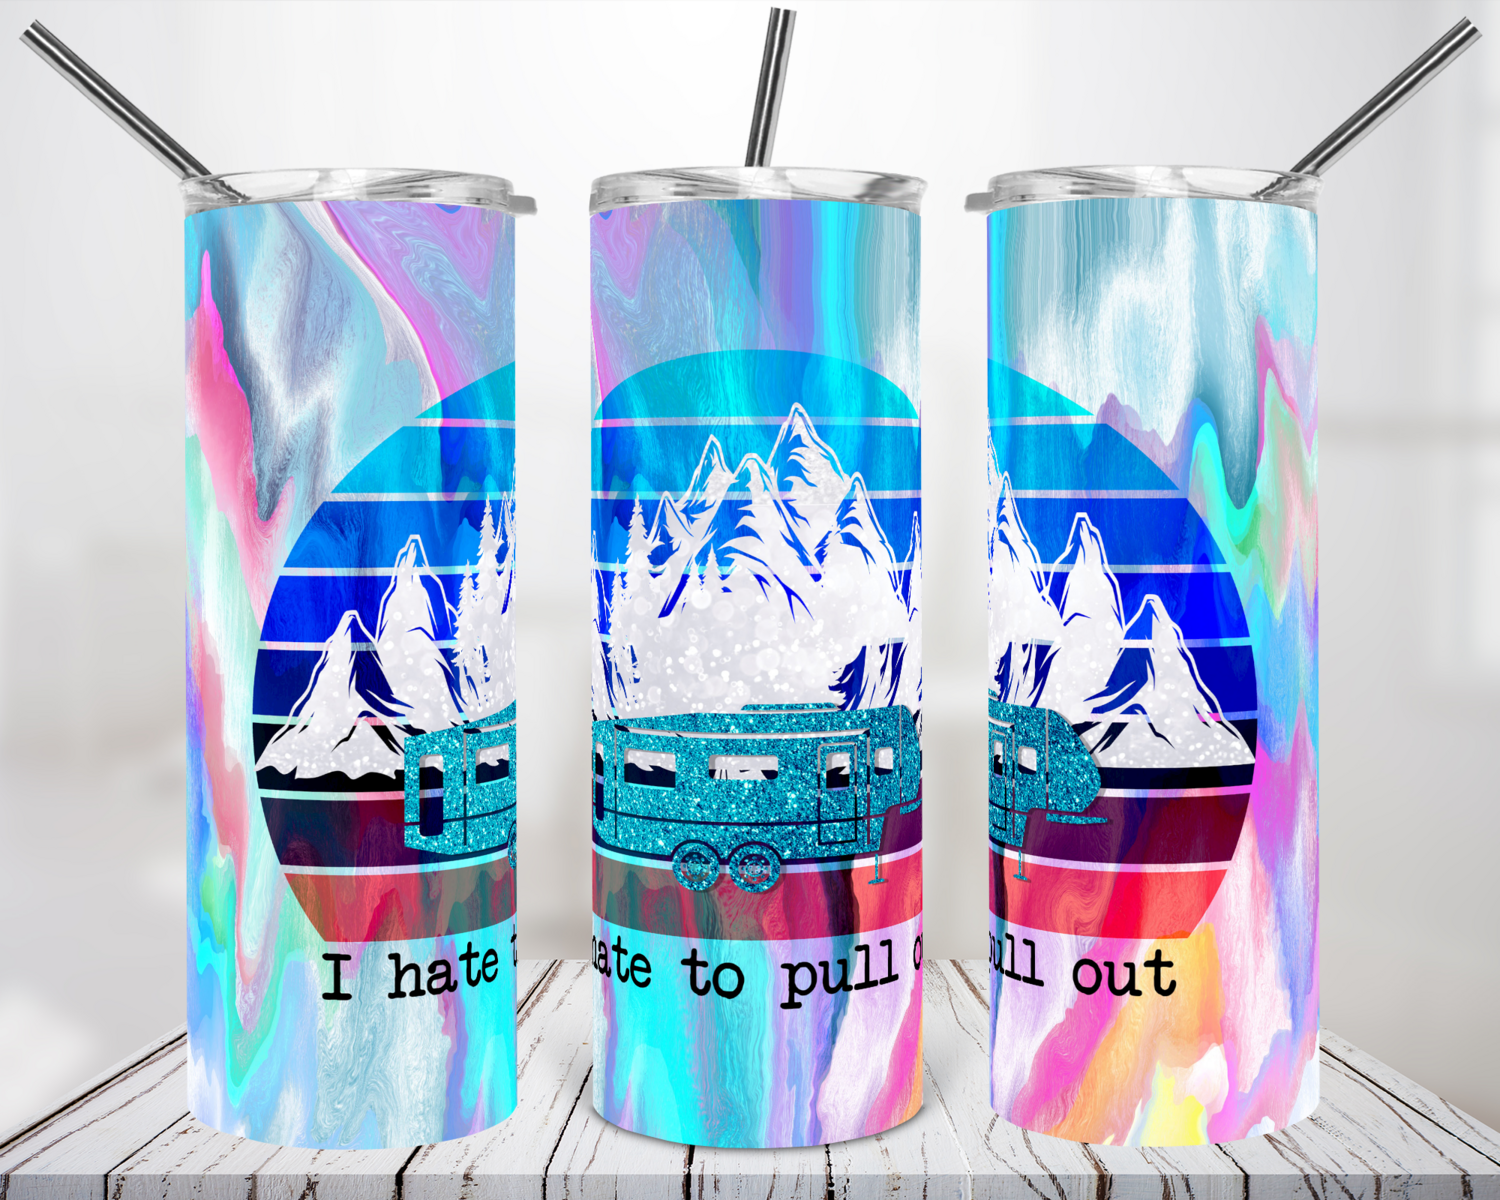 I hate to pull out -  20oz Tumbler Design